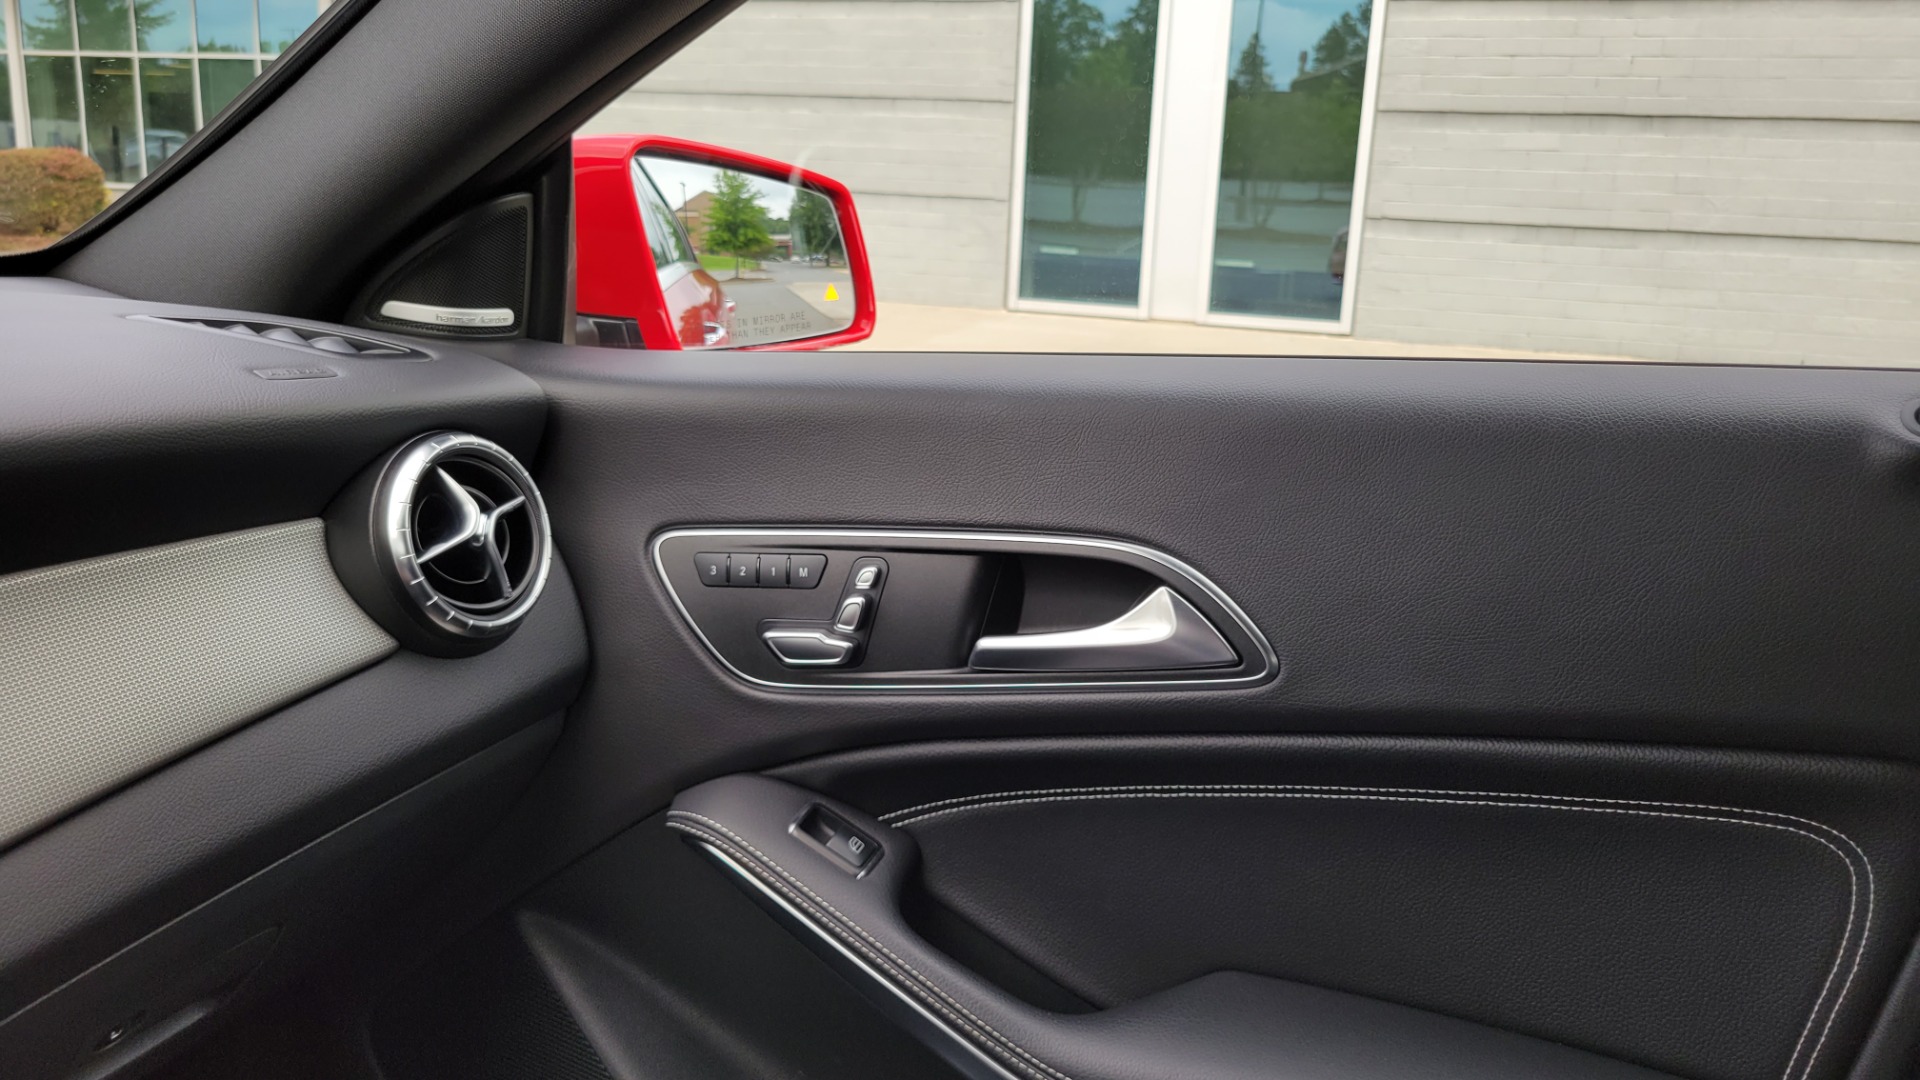 Used 2019 Mercedes-Benz CLA 250 PREMIUM / CONV PKG / PANO-ROOF / H/K SND / CAMERA for sale $31,995 at Formula Imports in Charlotte NC 28227 93